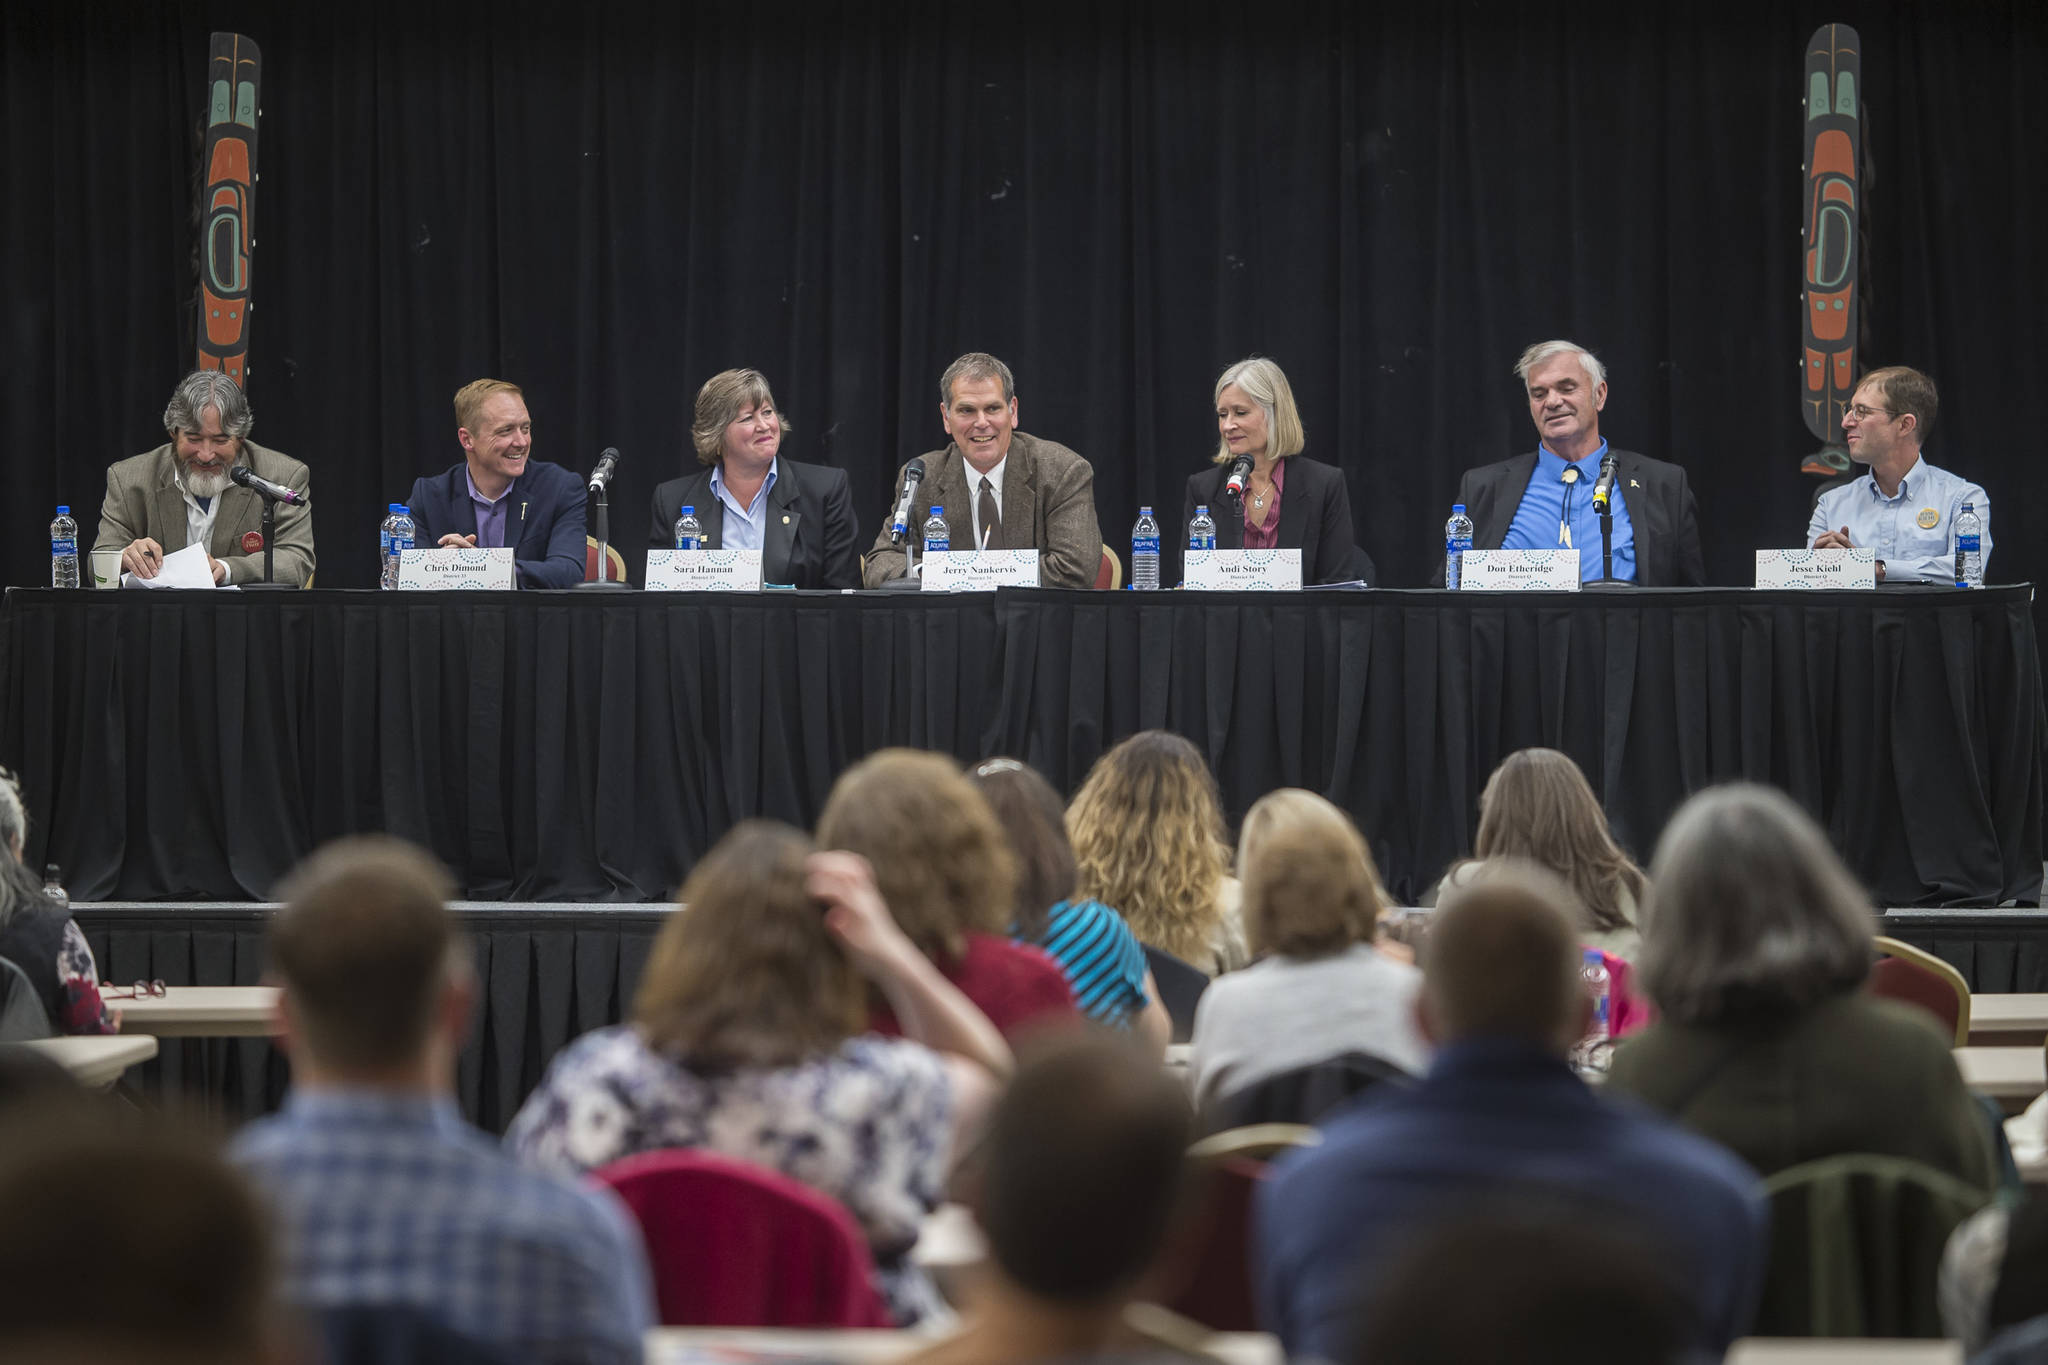 Legislative candidates answers questions during the Native Issues Forum at the Elizabeth Peratrovich Hall on Tuesday, Sept. 25, 2018. From left: Moderator Rep. Sam Kito III, D-Juneau, House District 33 candidates Chris Dimond and Sara Hannan, House District 34 candidates Jerry Nankervis and Andi Story, and Senate District Q candidates Don Etheridge and Jesse Kiehl. (Michael Penn | Juneau Empire)